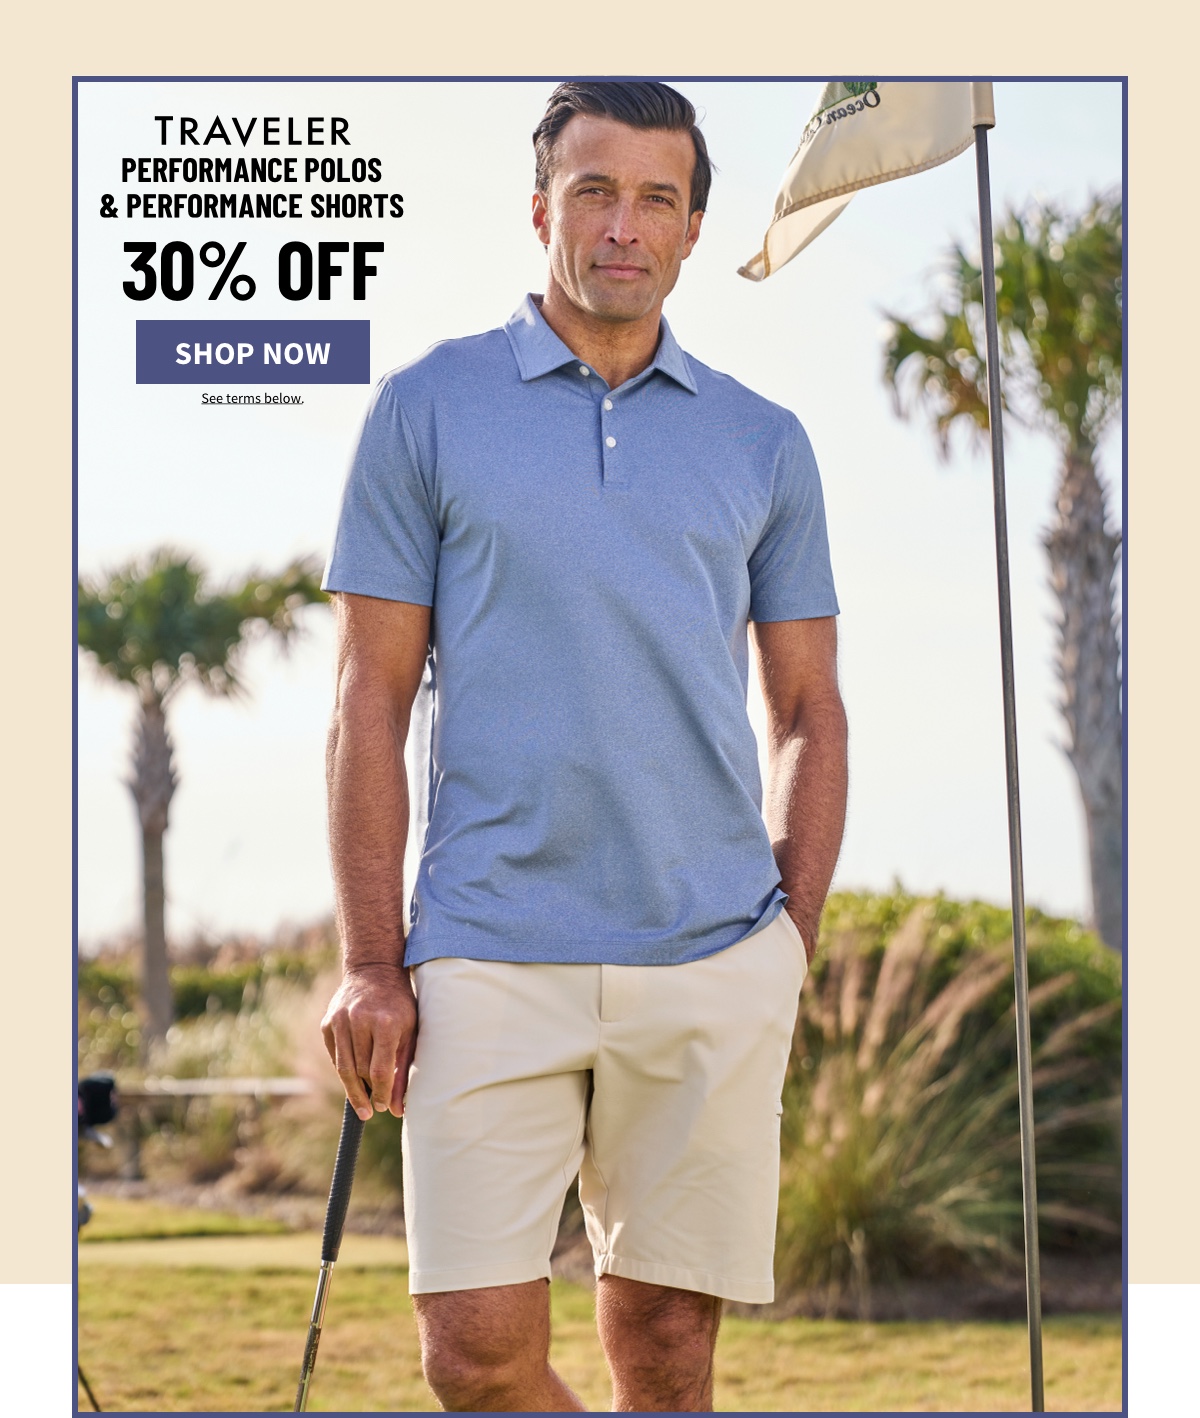 Traveler Performance Polos and Performance Shorts 30% off Shop Now See terms below.